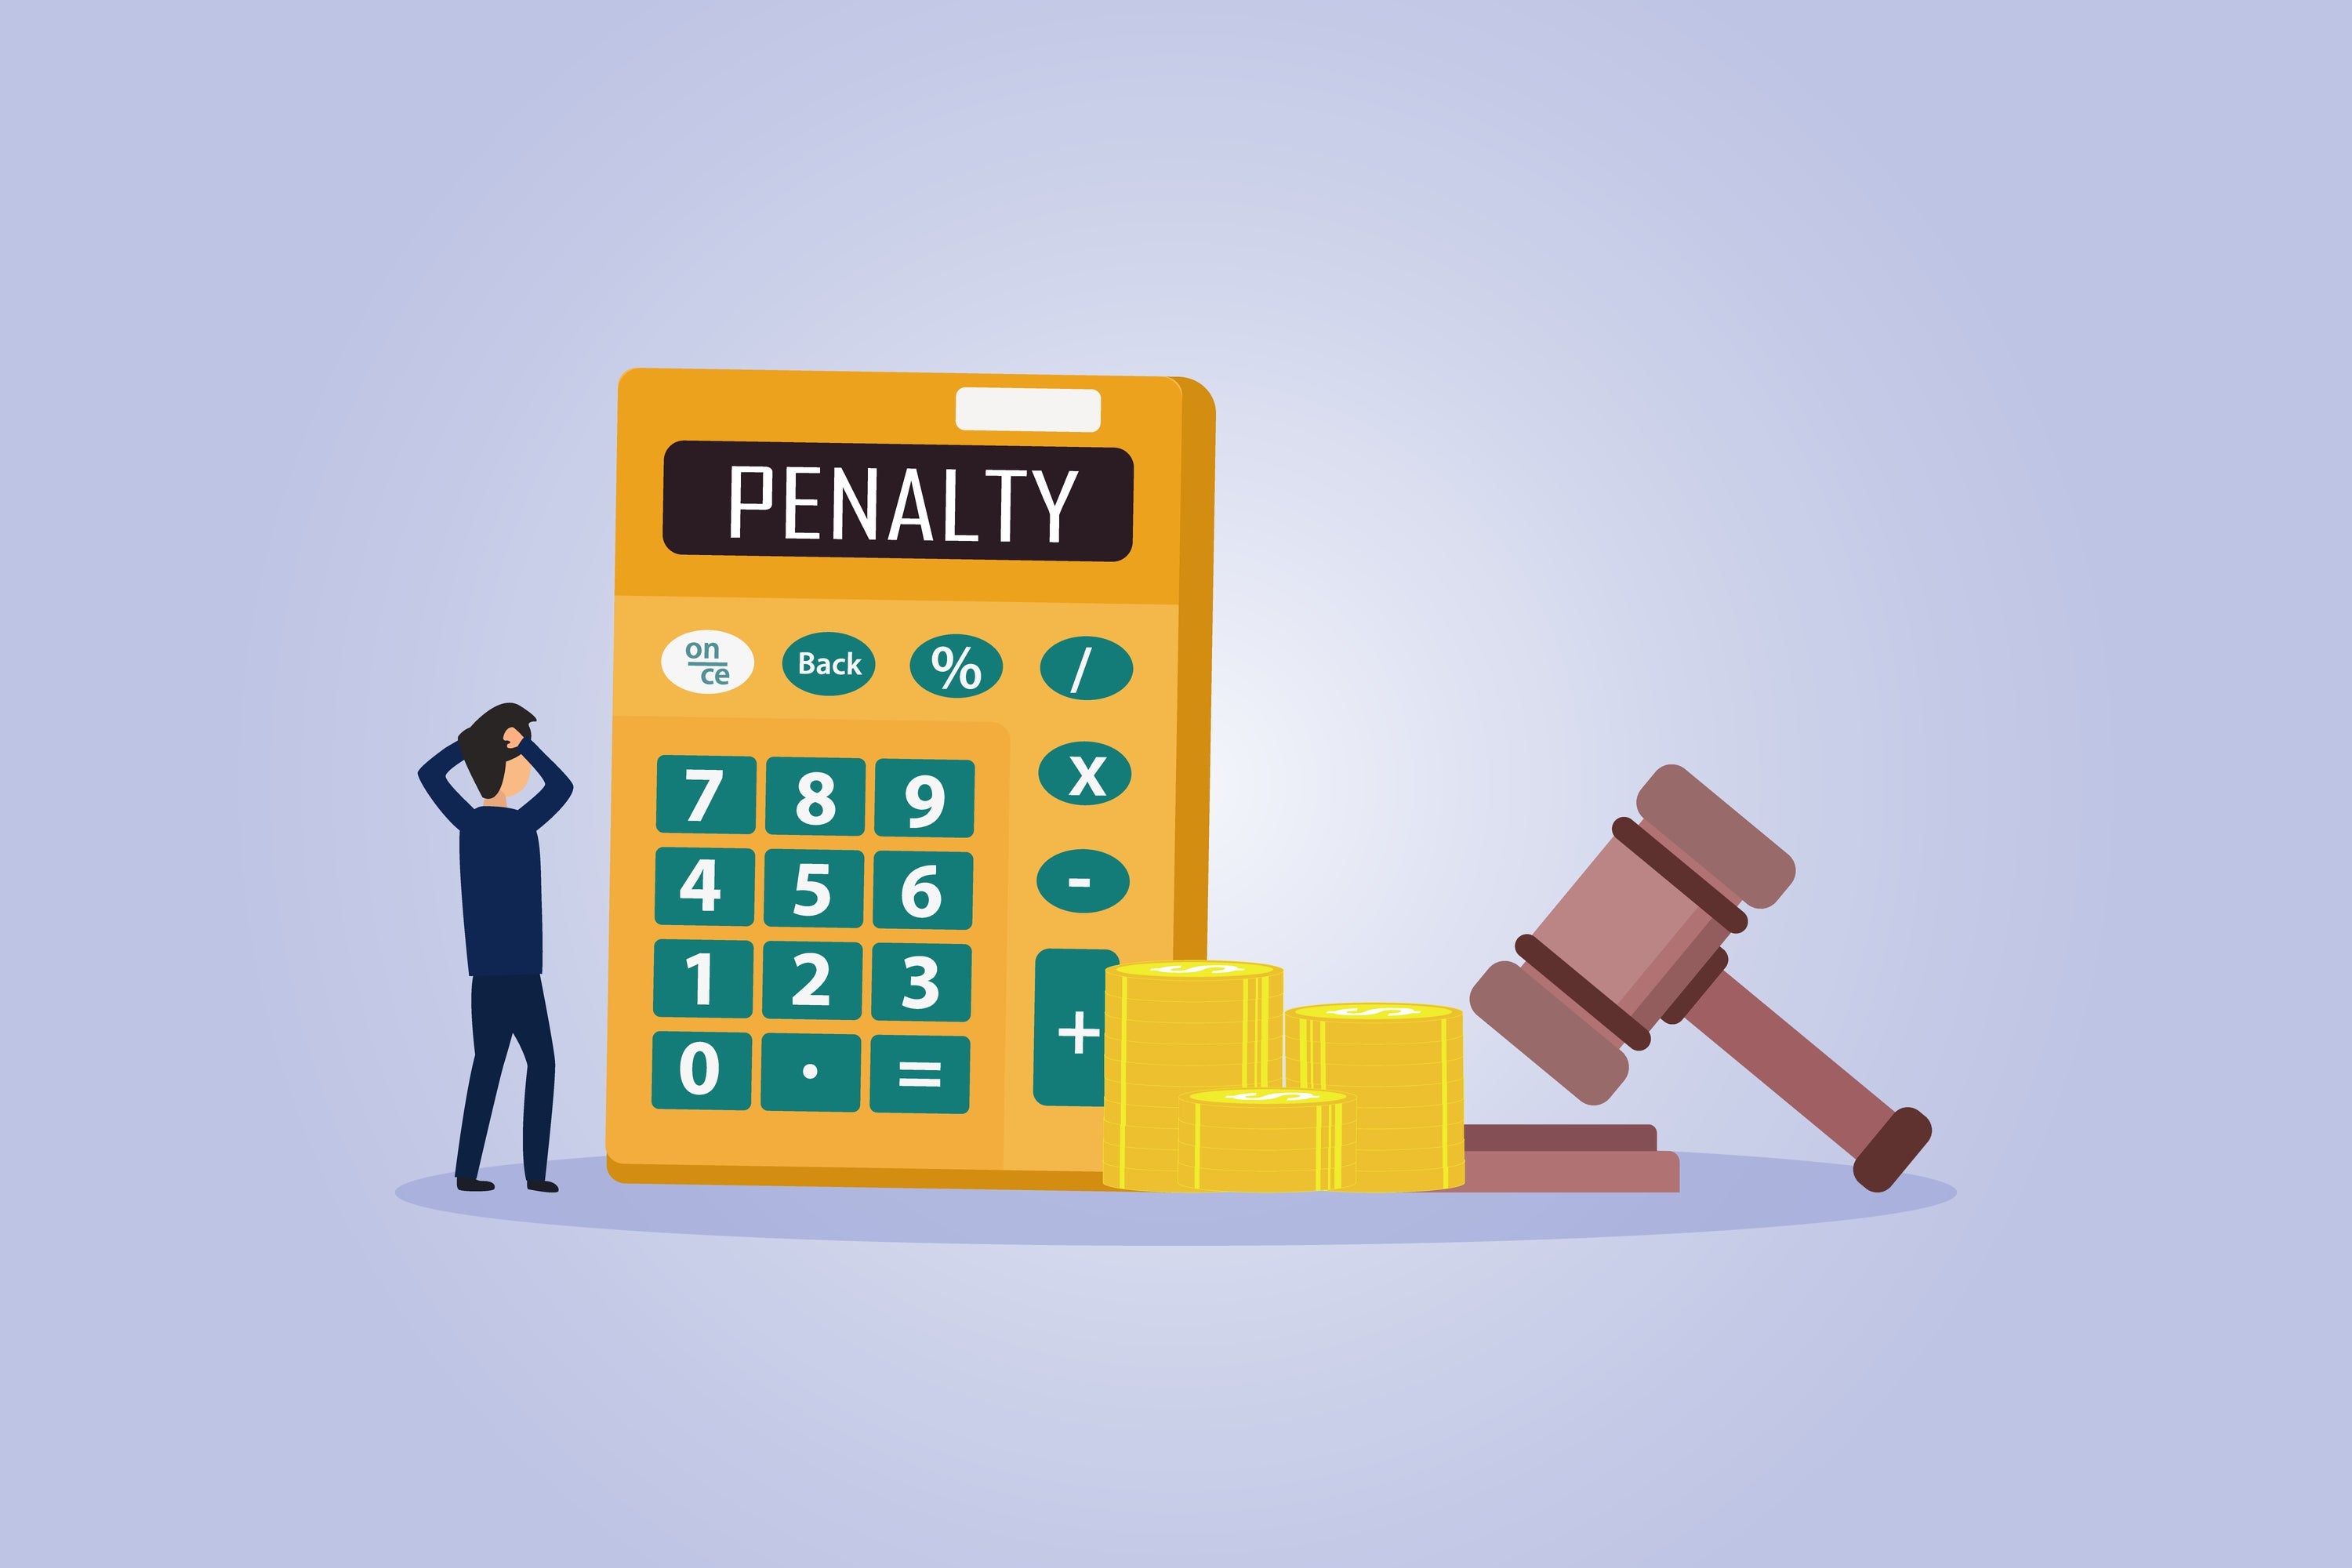 Businessman with Penalty text on the calculator with coins and justice gavel.